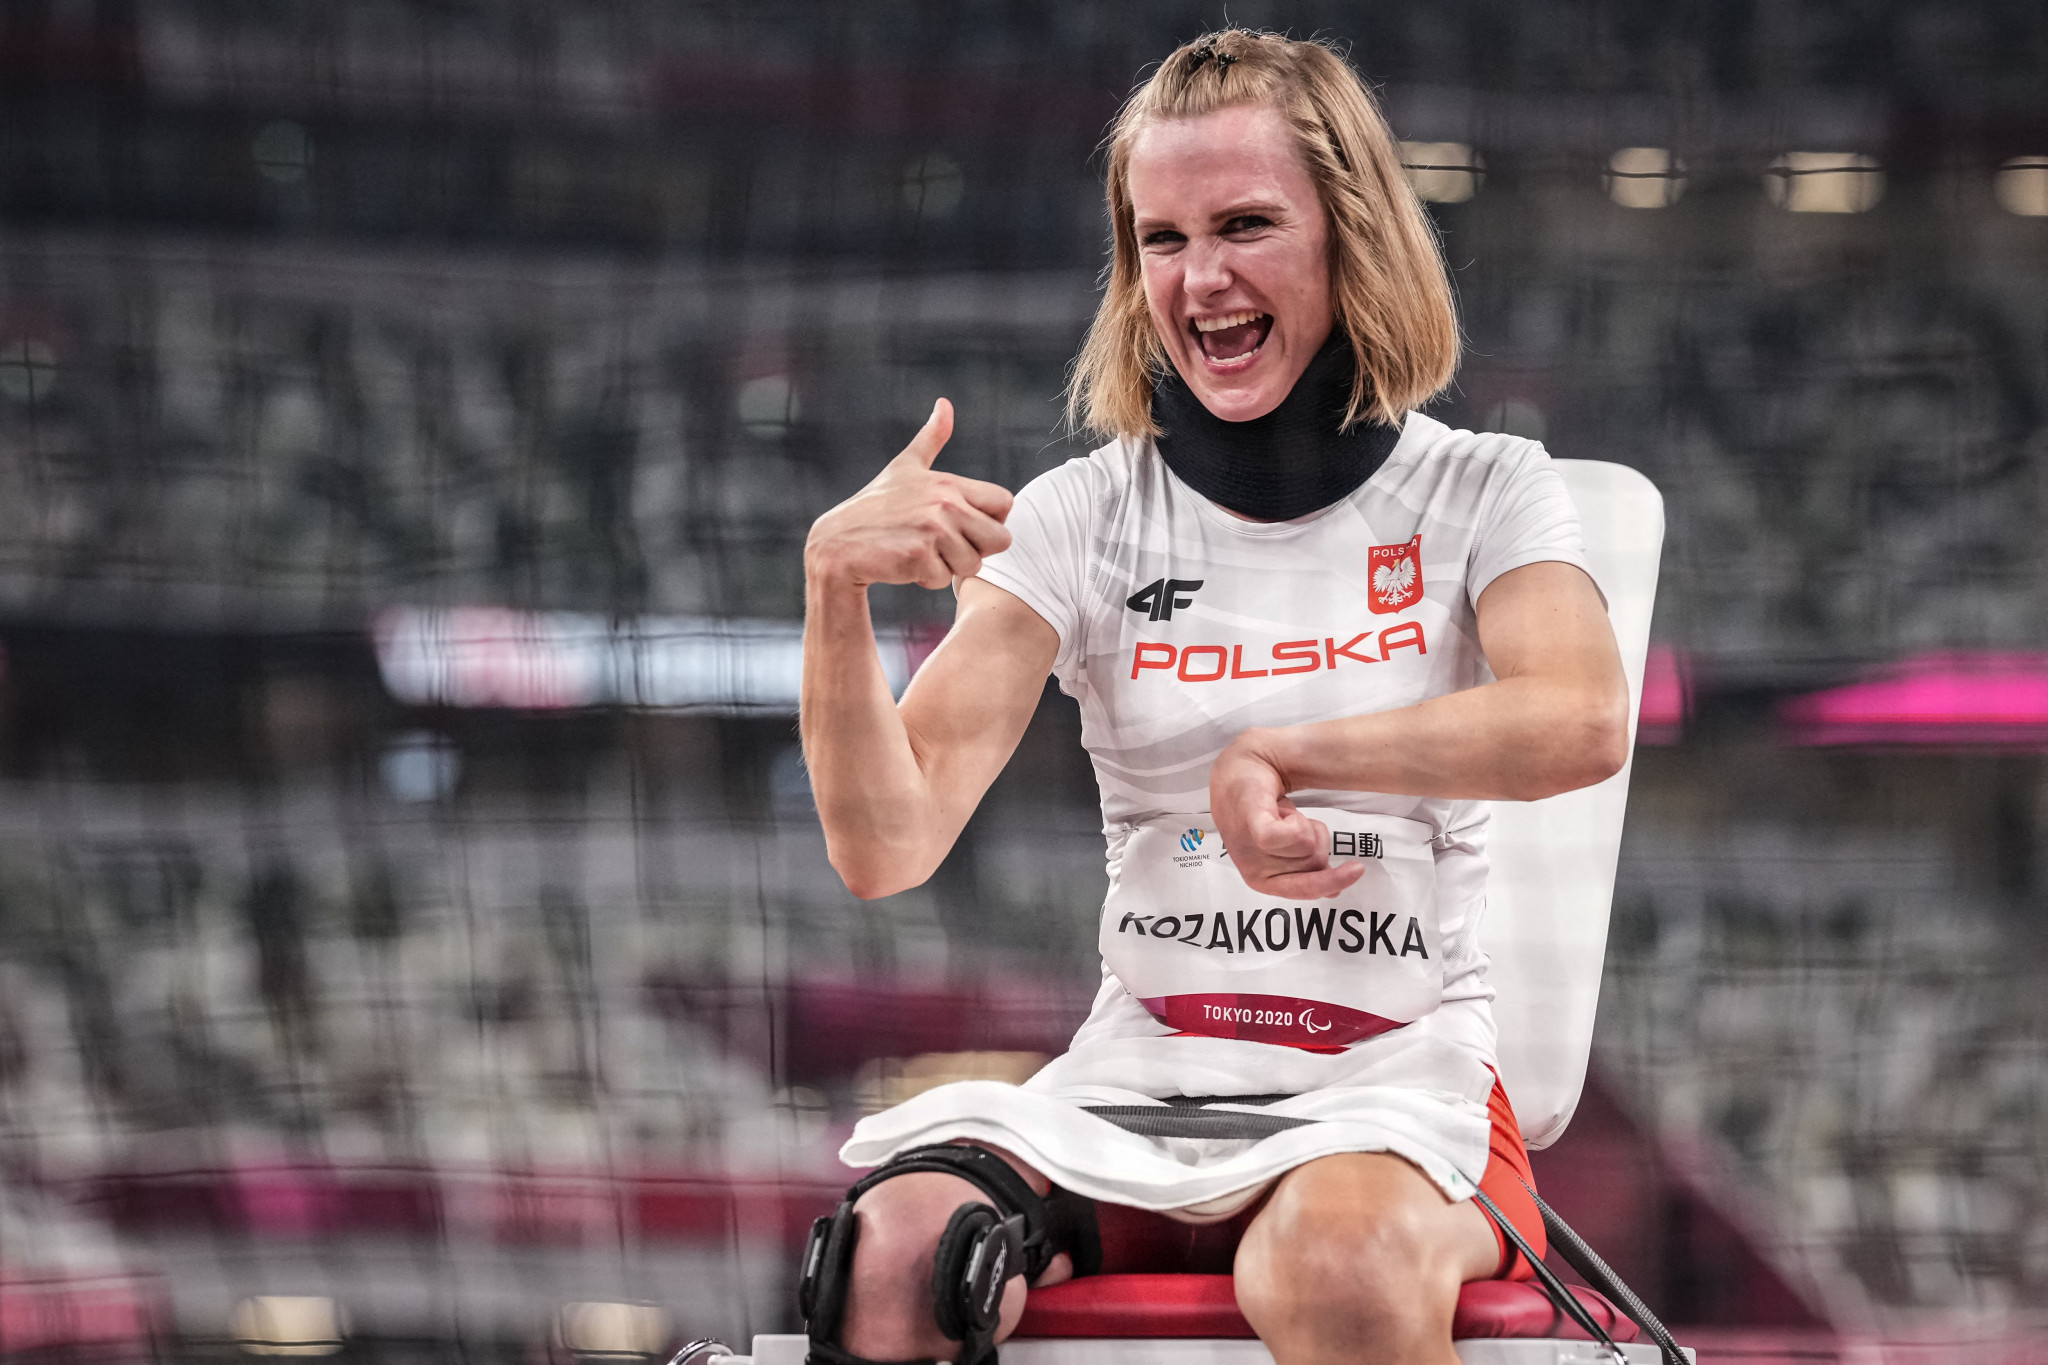 Róża Kozakowska has been named Poland's Disabled Athlete of the Year ©Getty Images